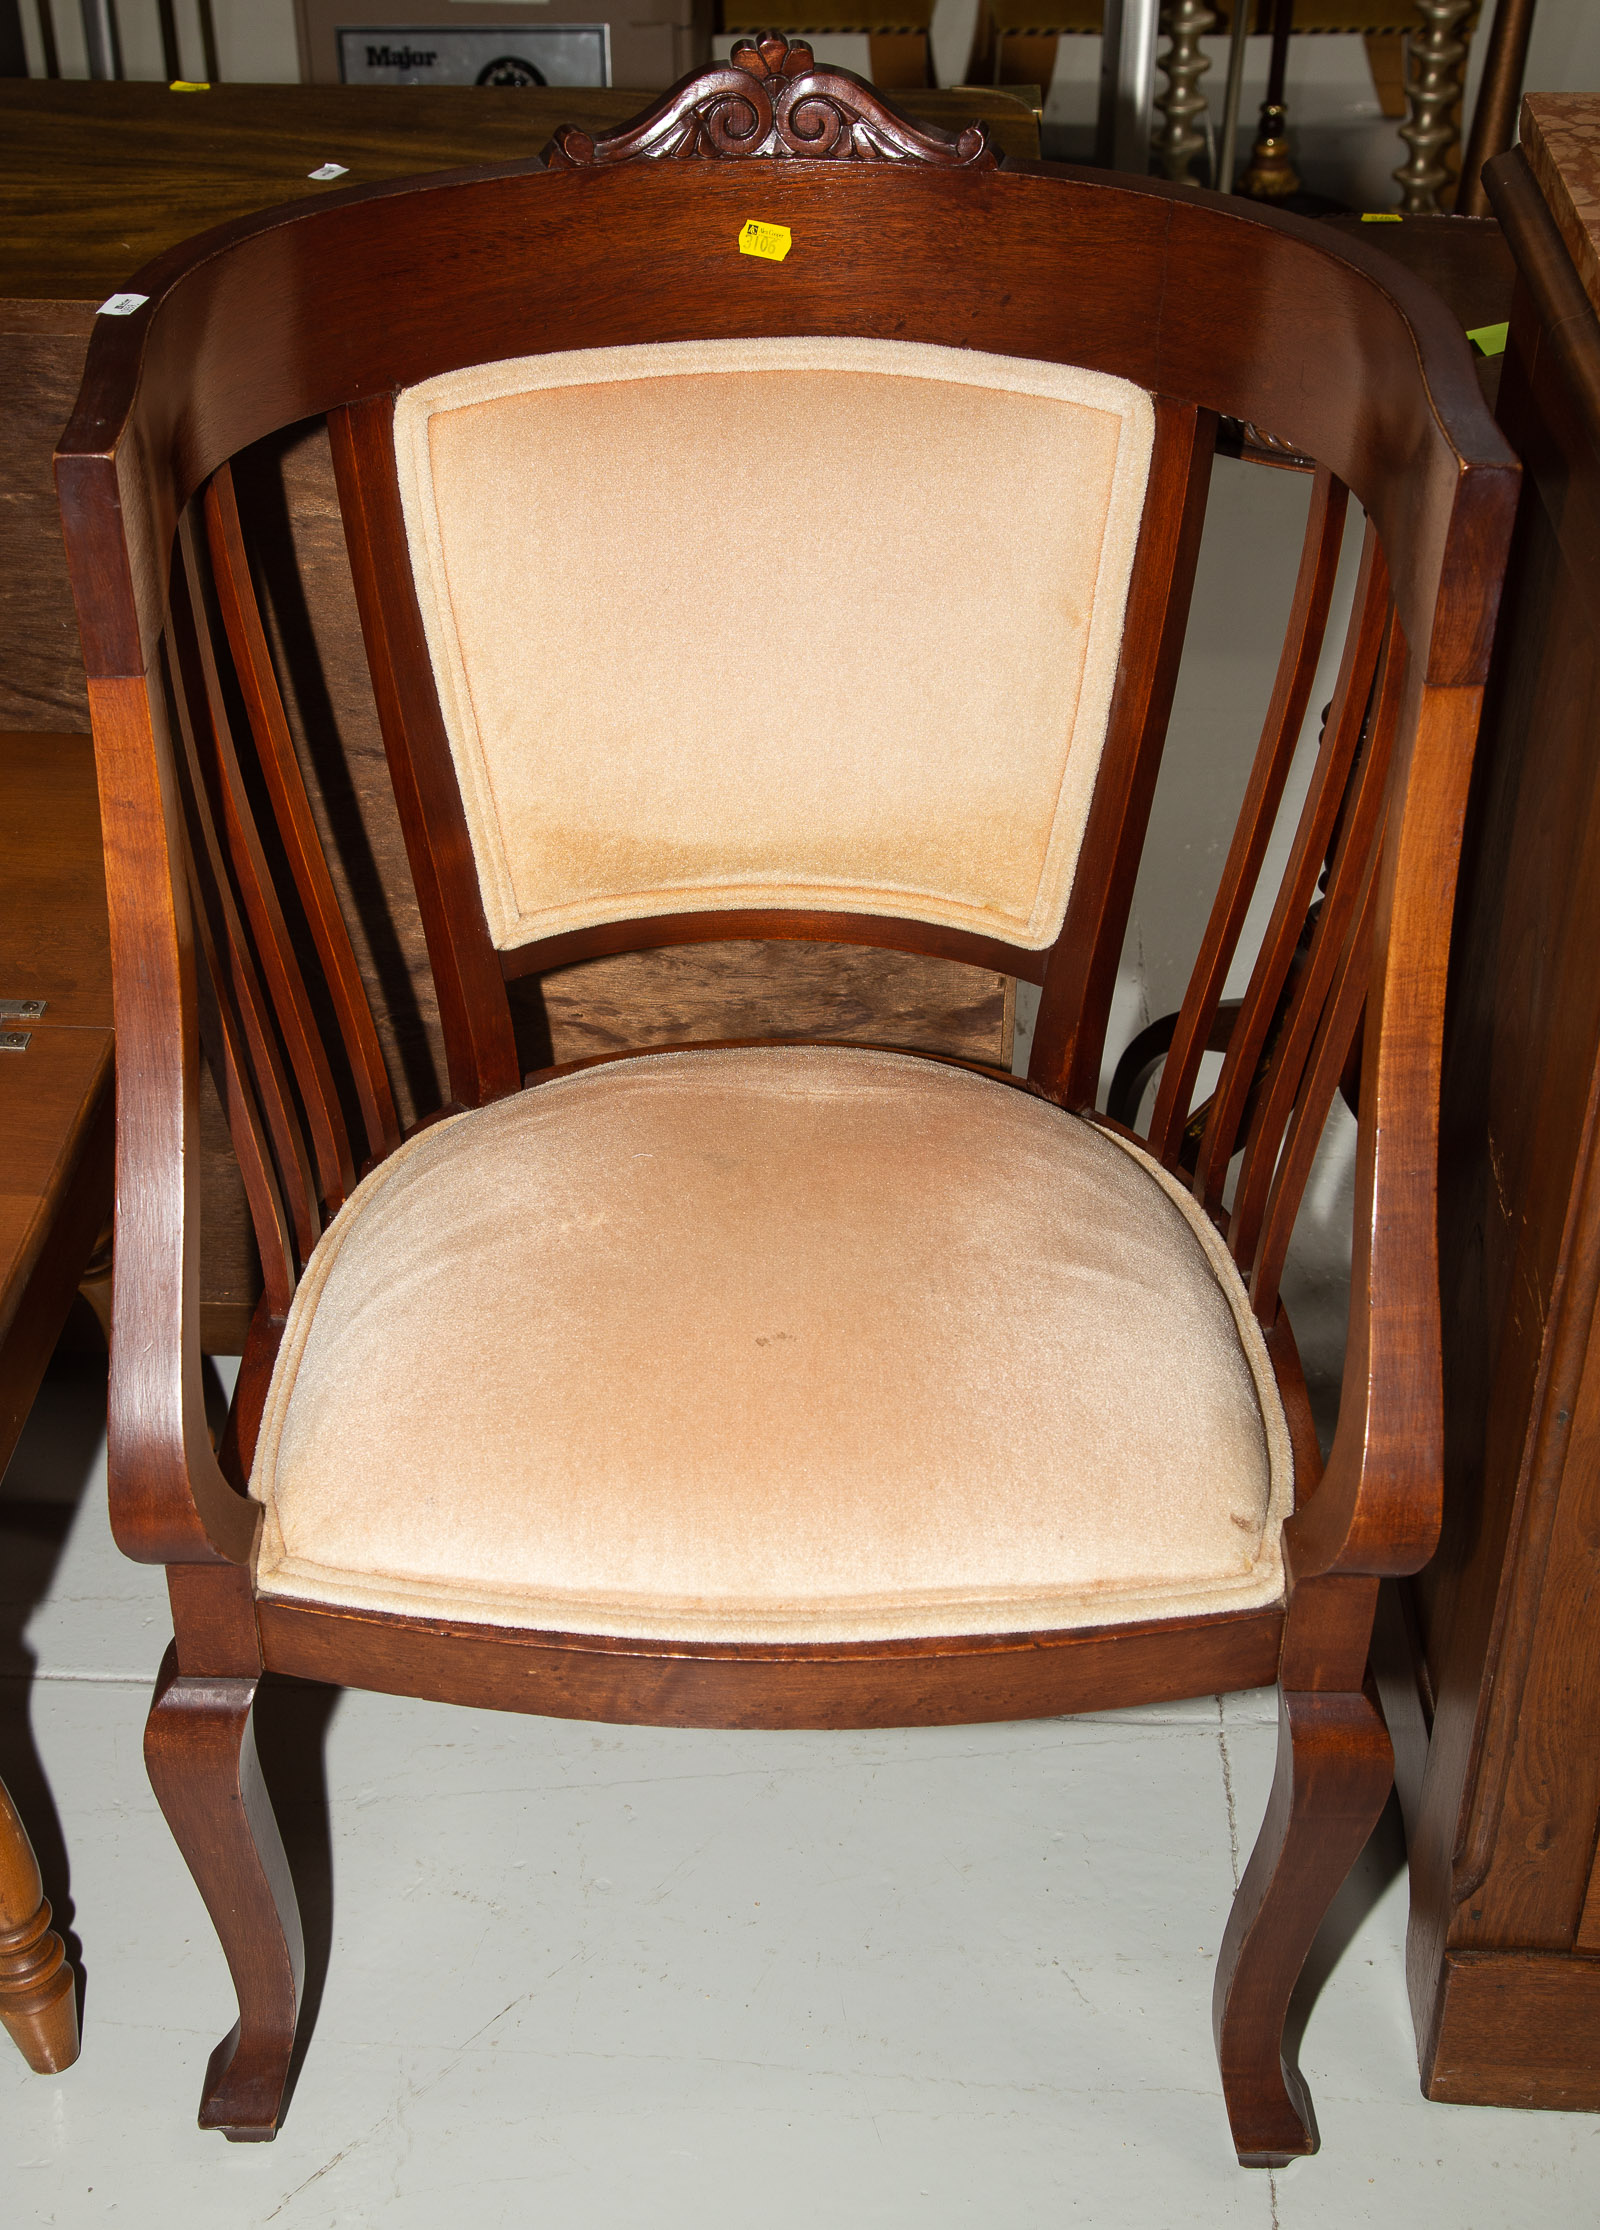 MAHOGANY CHAIR Plaque on back "THIS